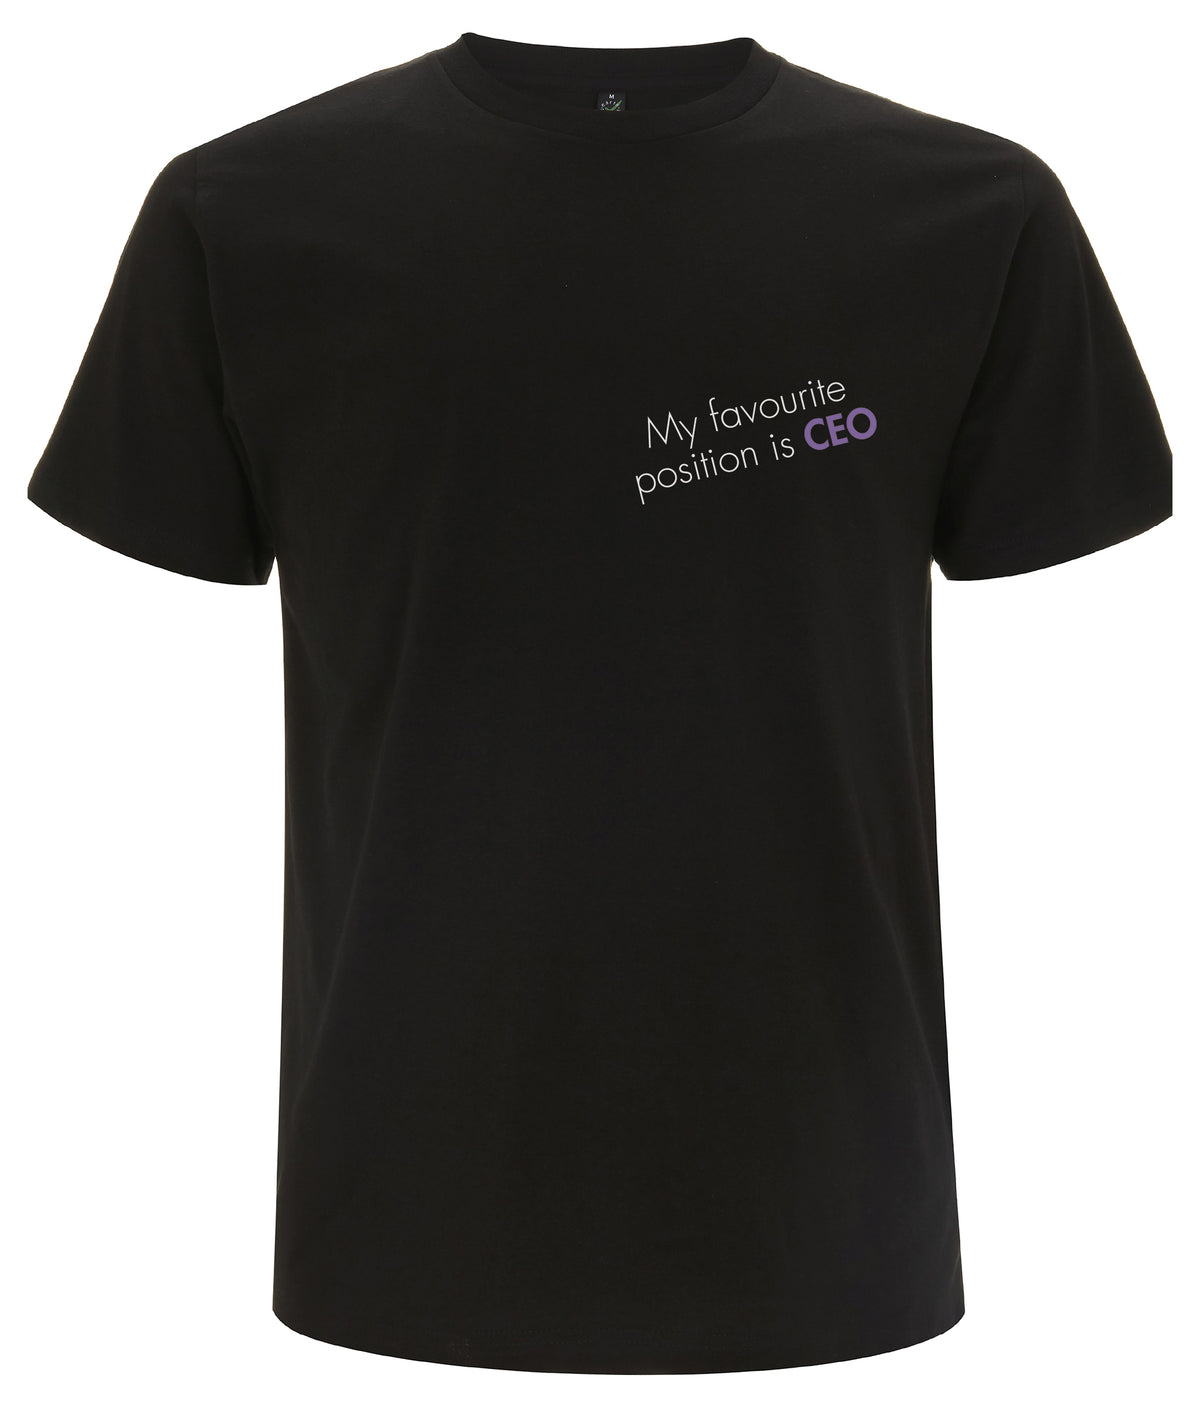 My Favourite Position Is CEO Organic Feminist T Shirt Black